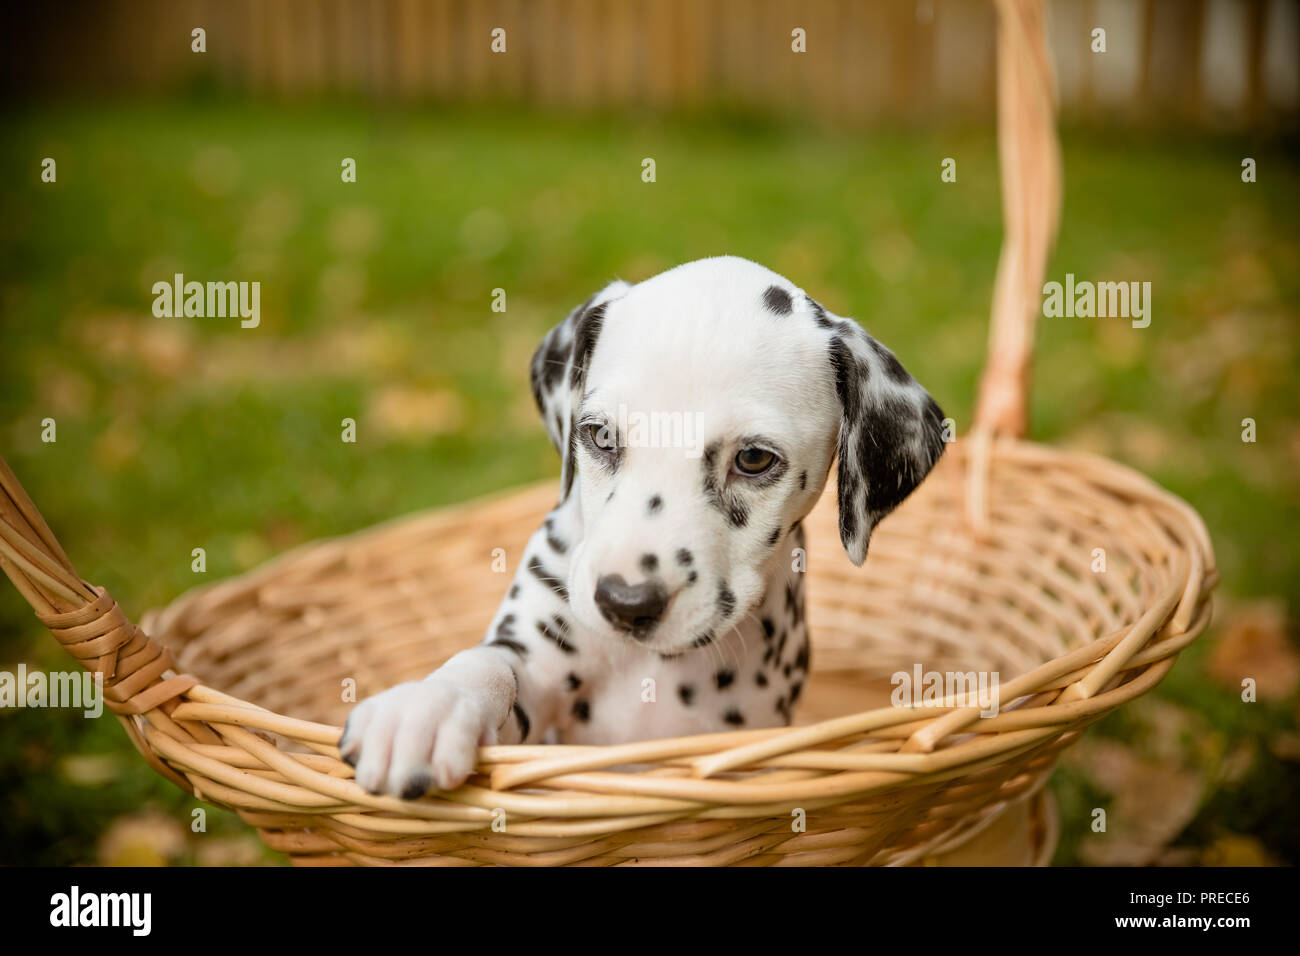 dog breed Dalmatian, cute small puppy in a basket outdoors. Fall ...